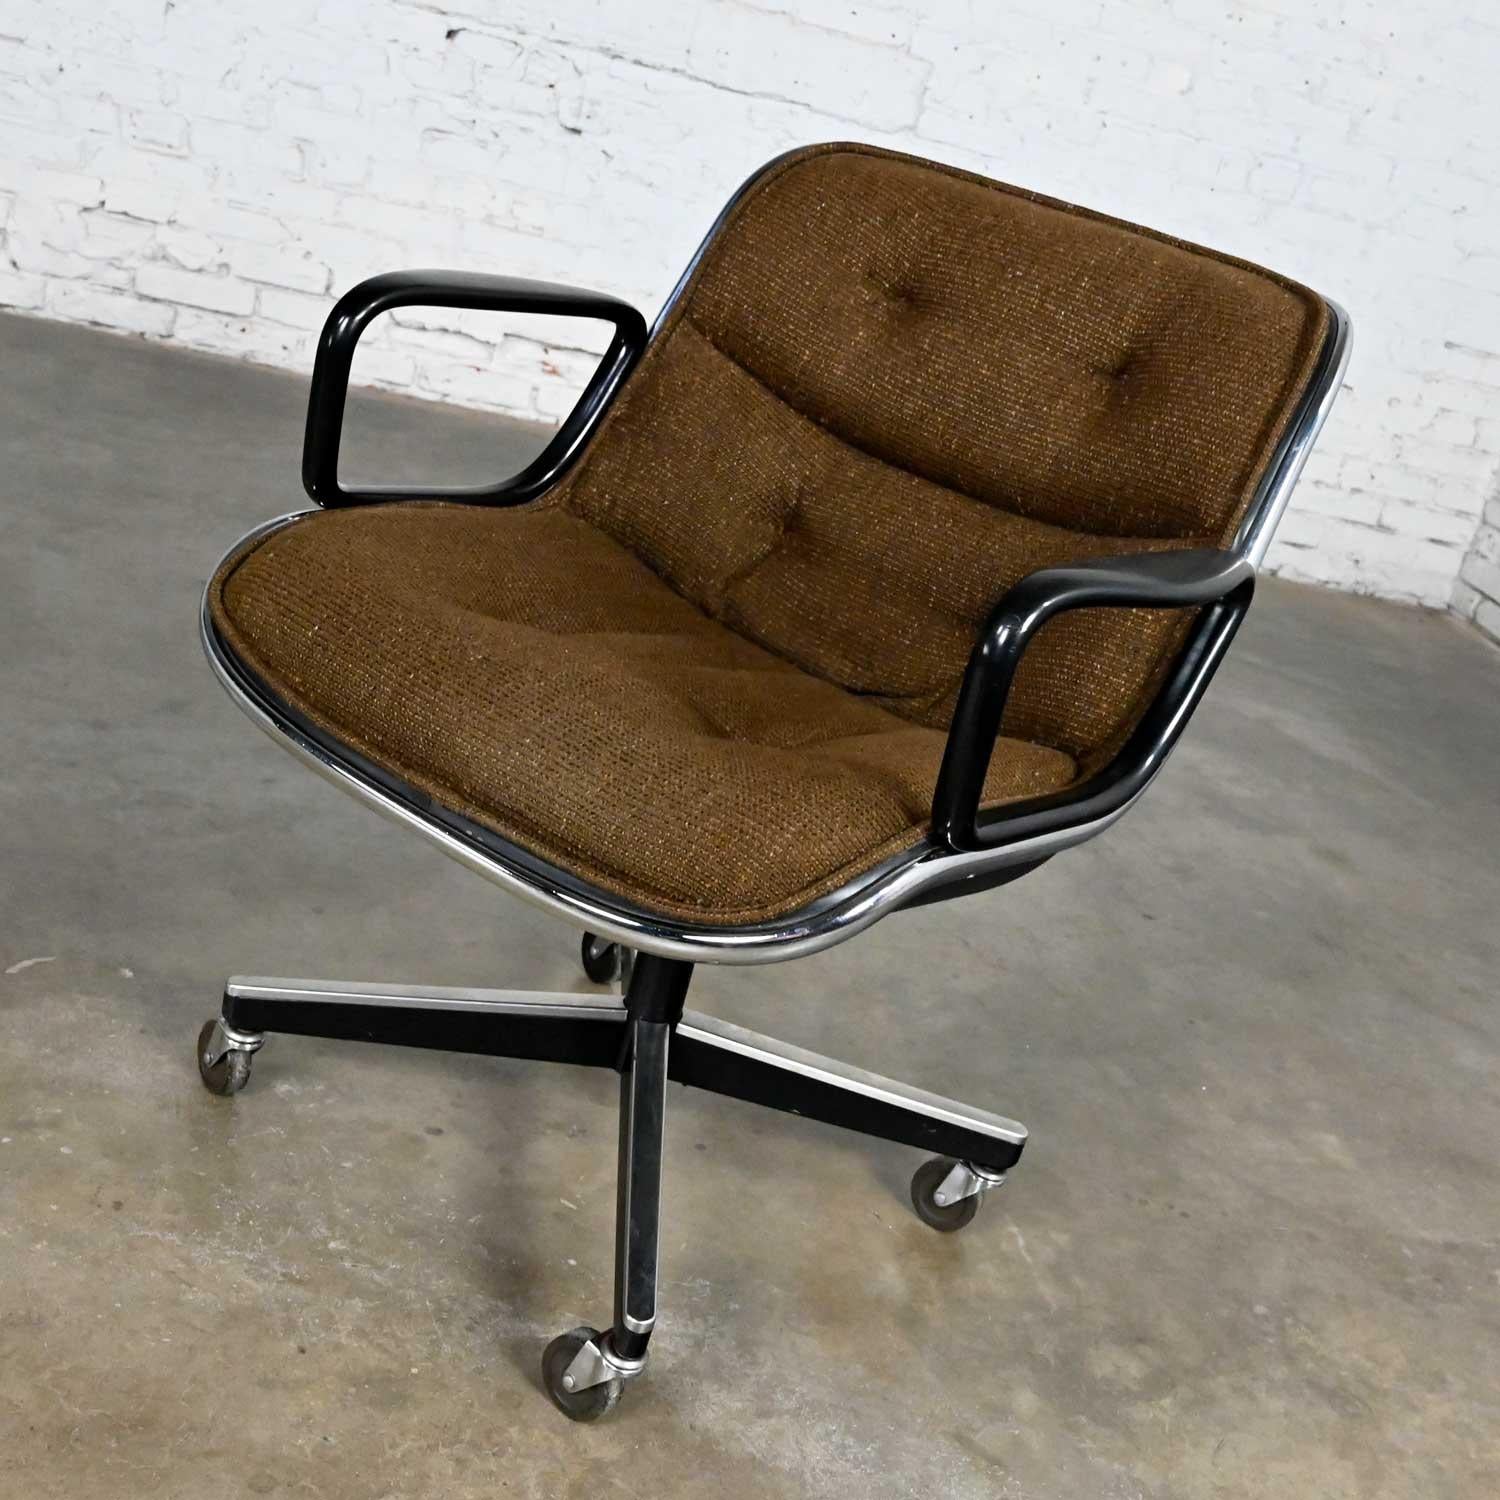 Handsome MCM or Mid-Century Modern executive chair by Charles Pollock for Knoll. Comprised of brown tweed hopsacking, aluminum band, chrome shaft, black plastic back and arms, and a 4-prong stainless base with casters. Beautiful condition, keeping